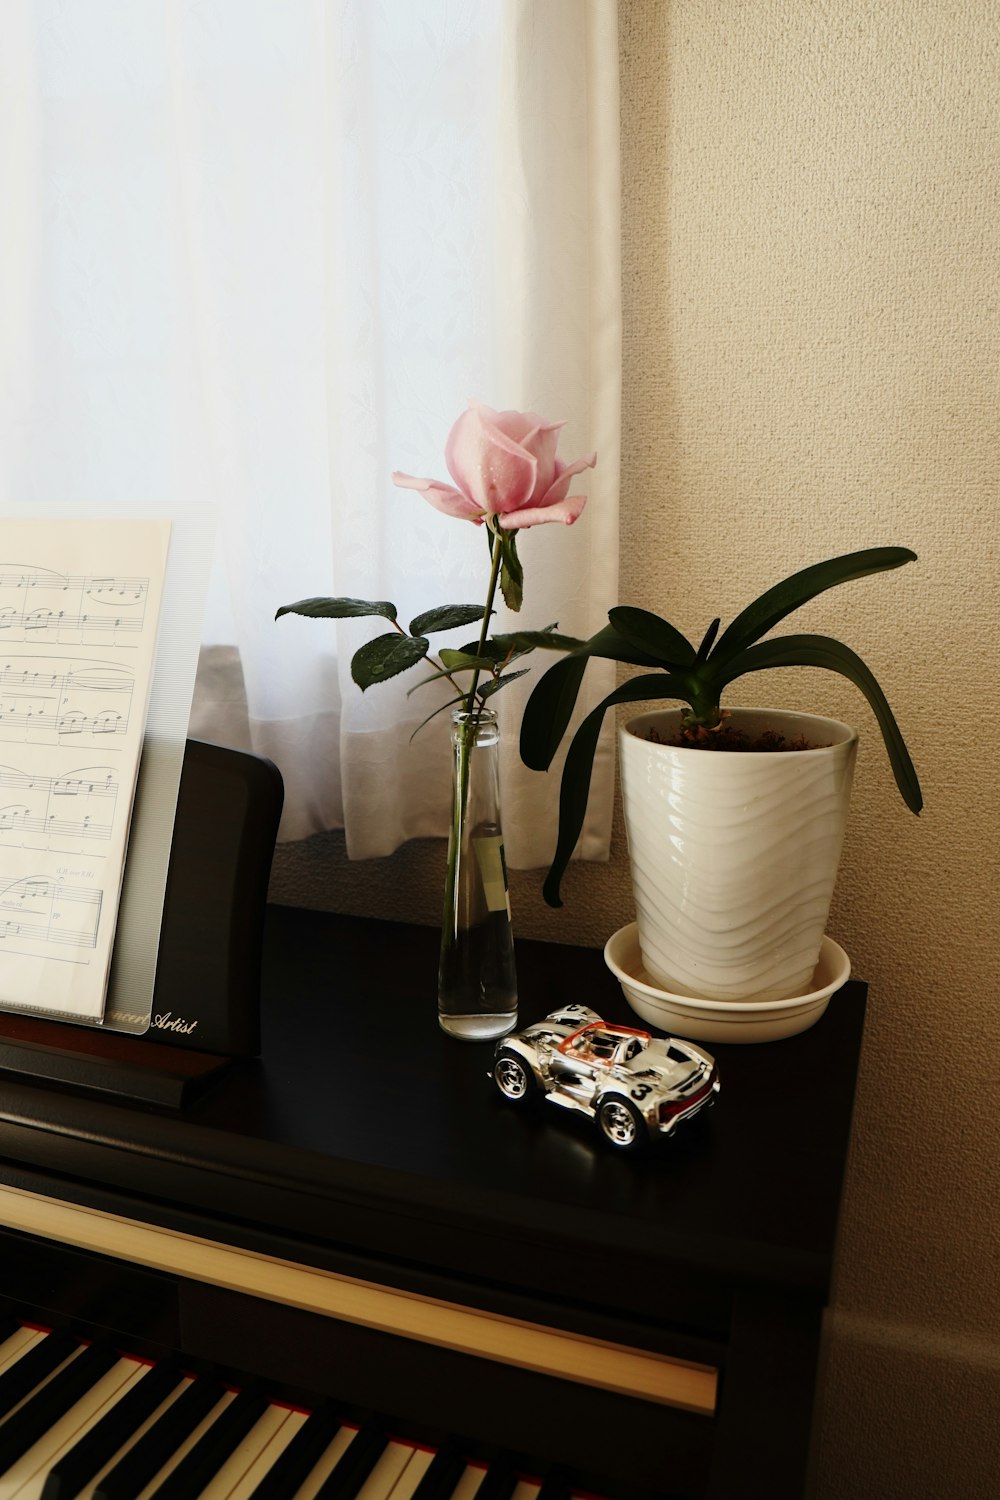 a piano, a vase with a flower and a sheet of music